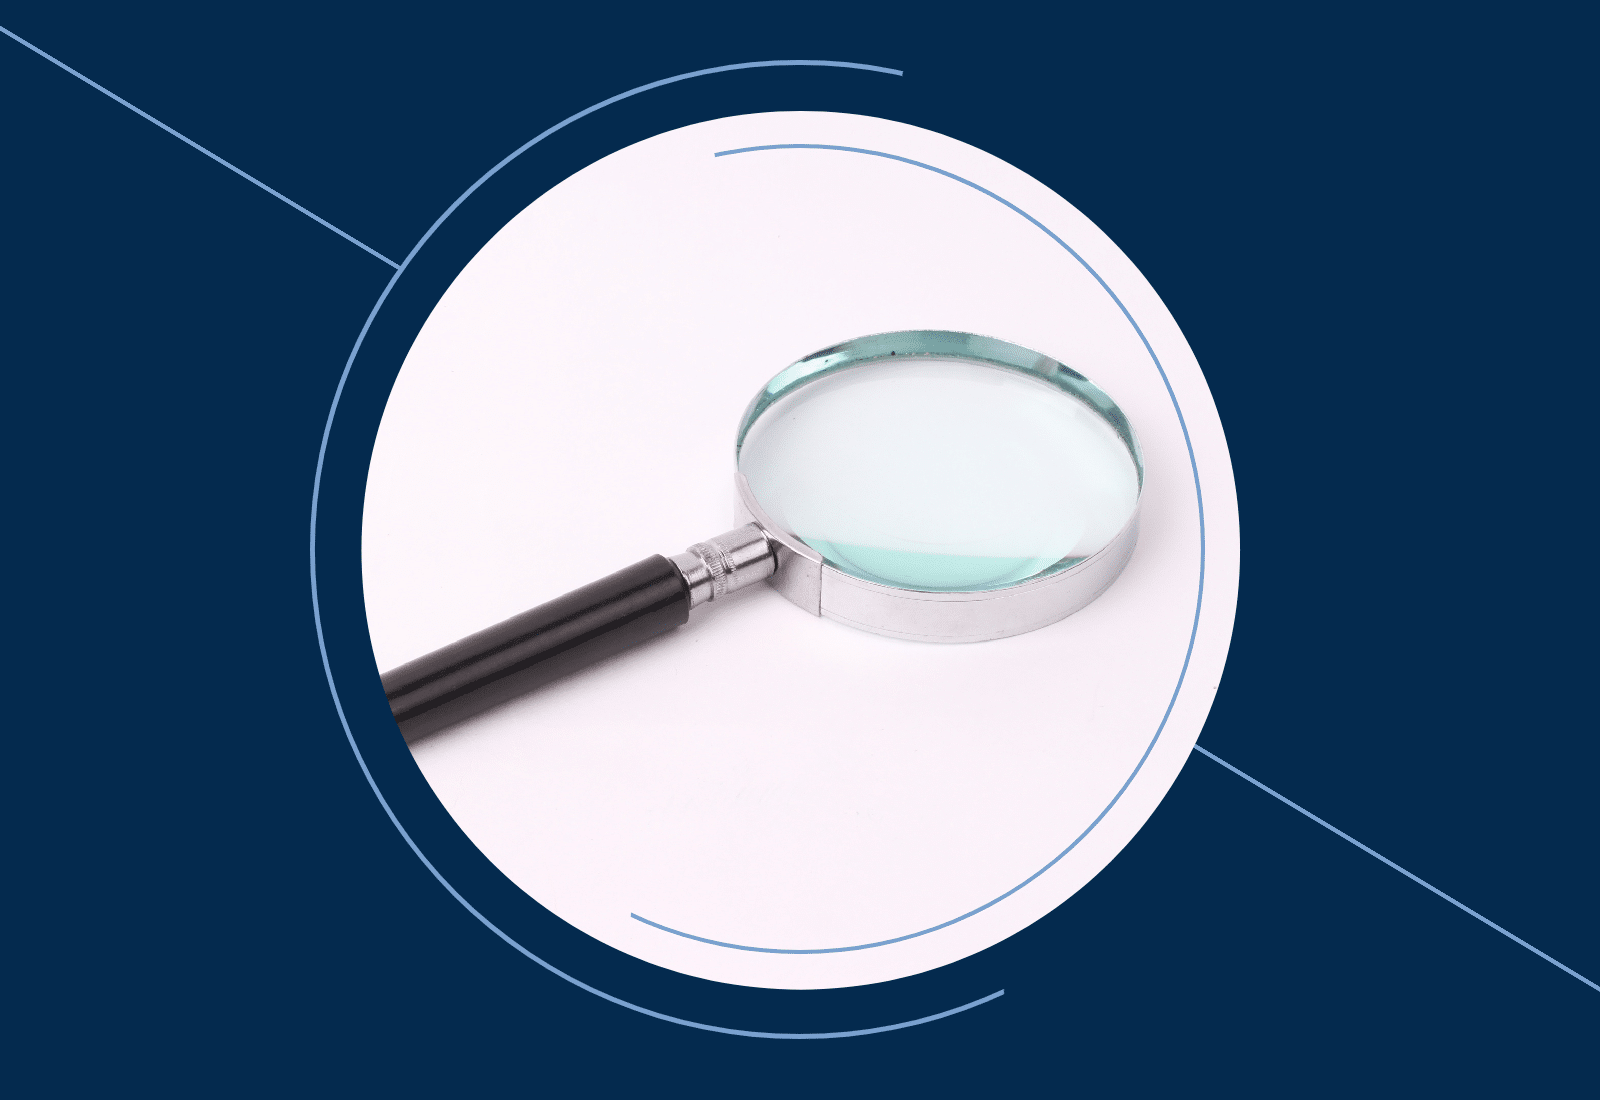 magnifying glass inside a circle